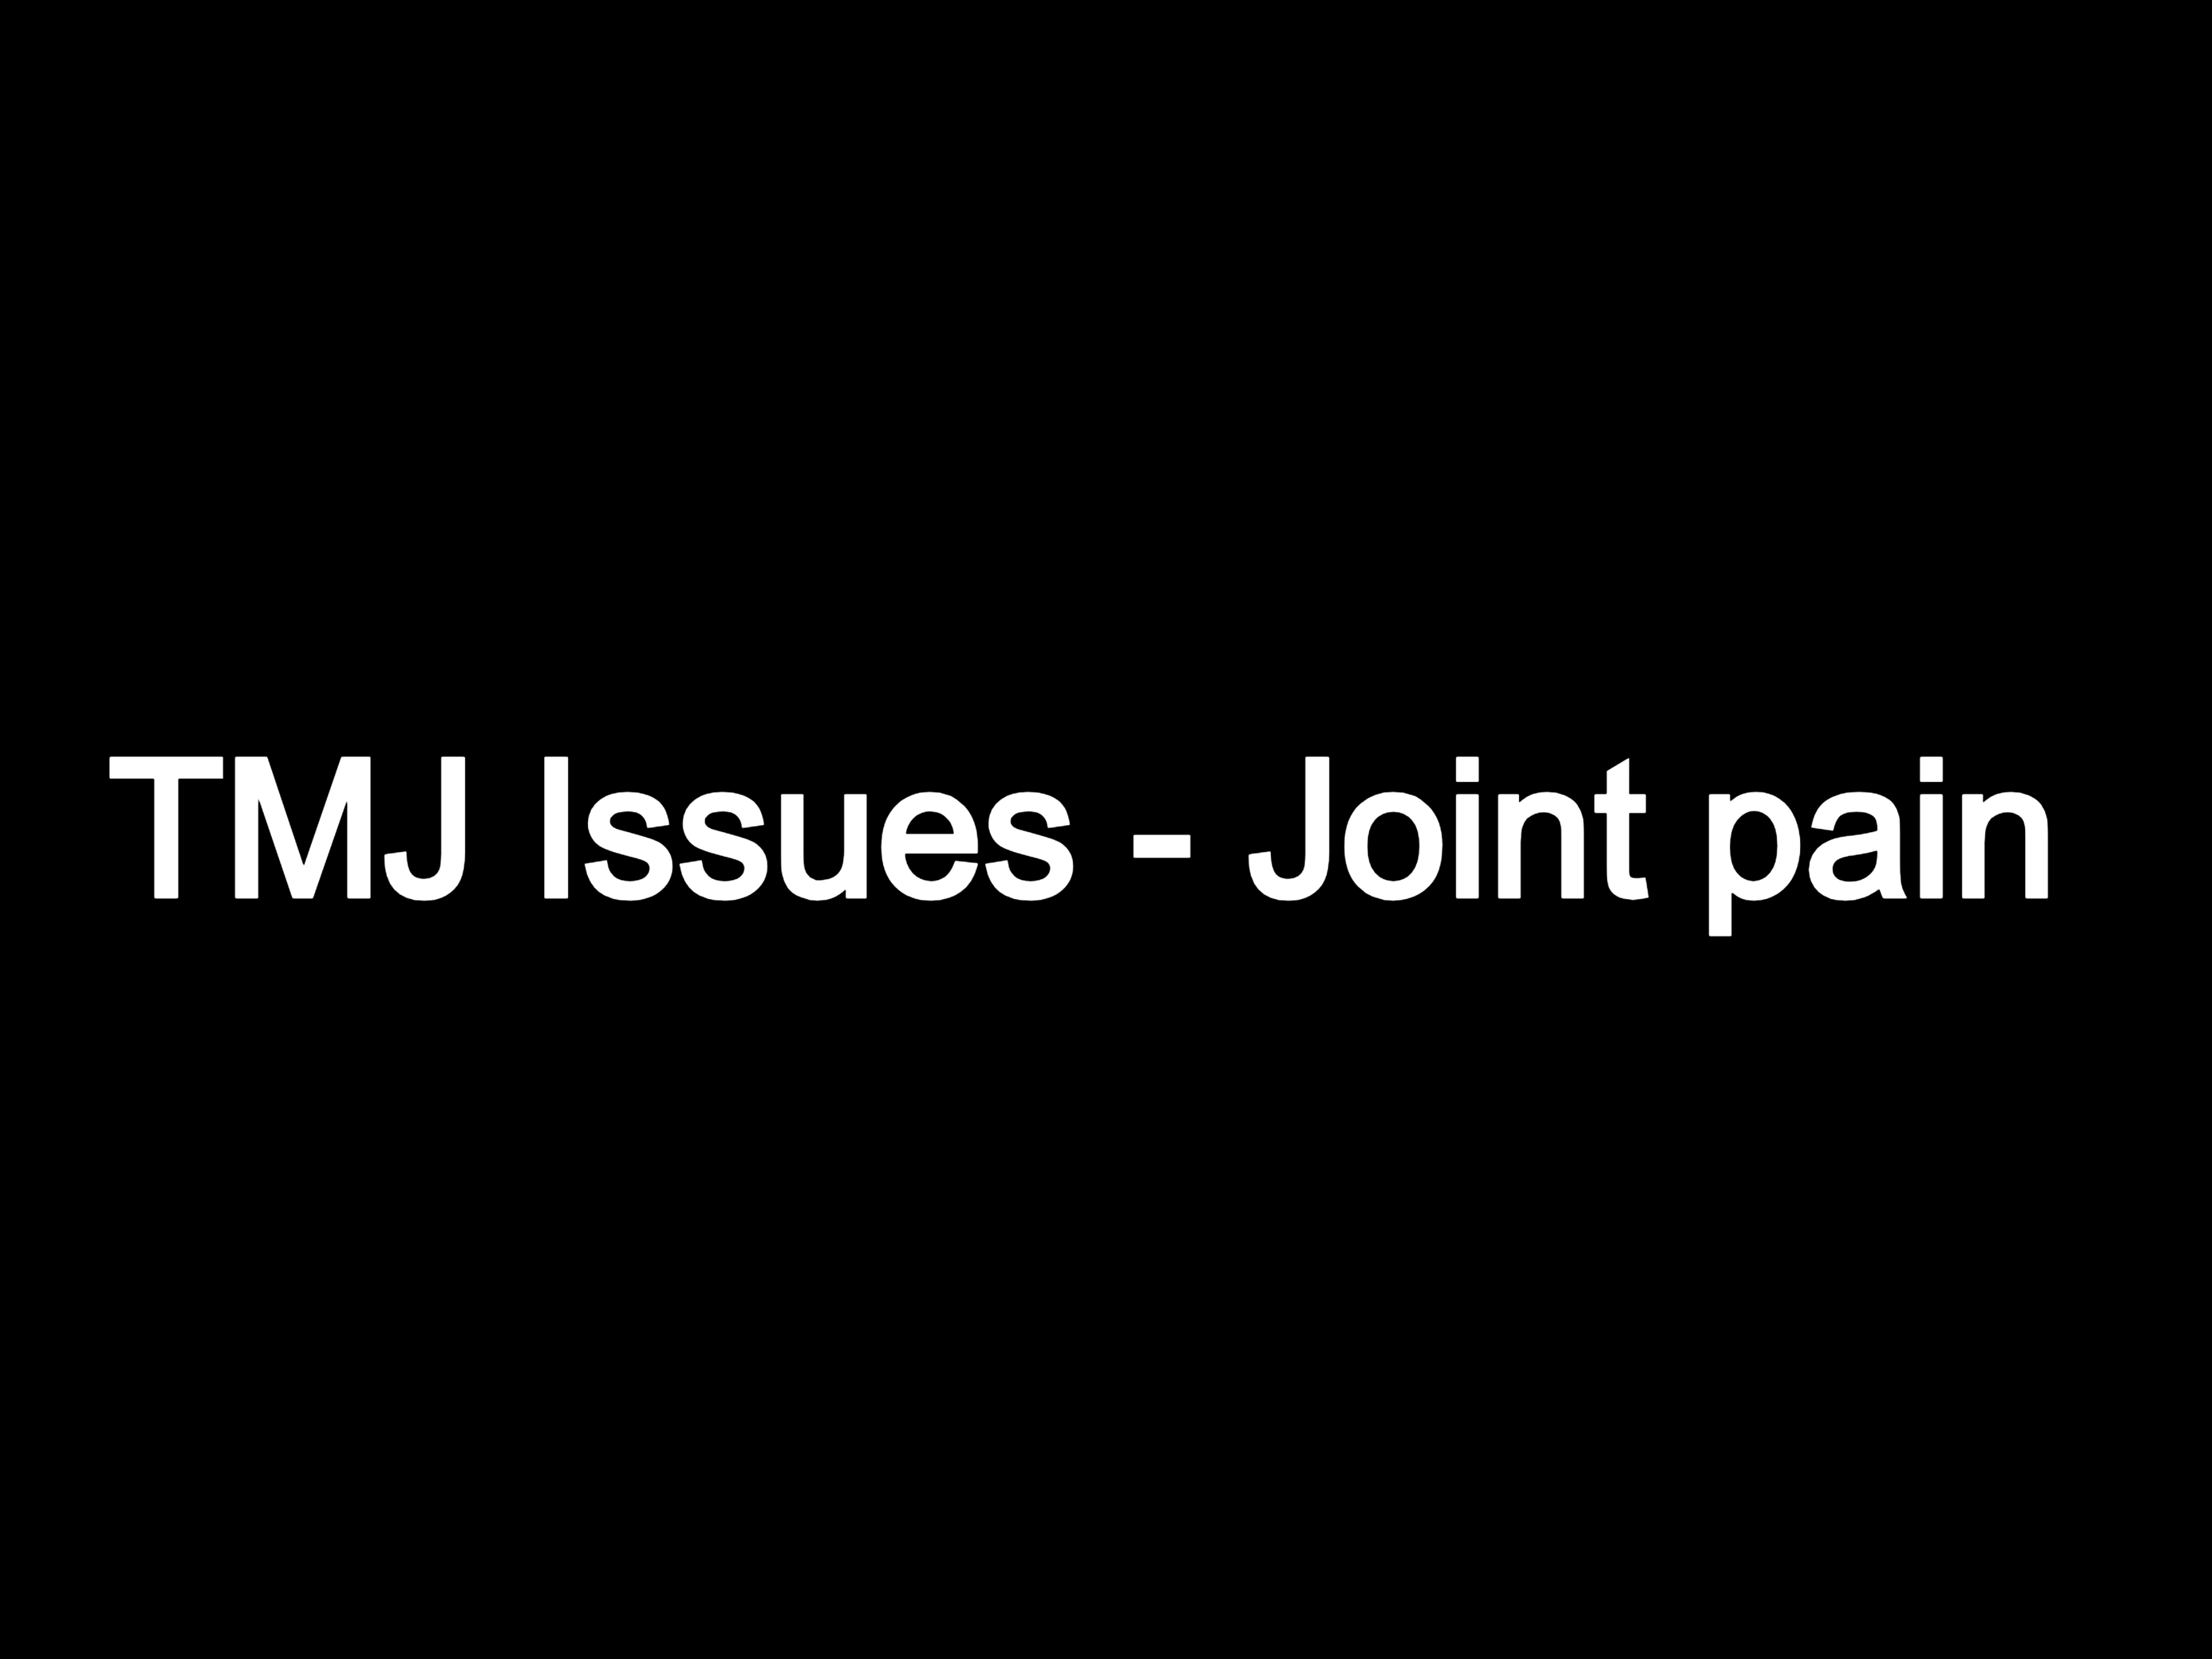  TMJ Issues - Joint pain